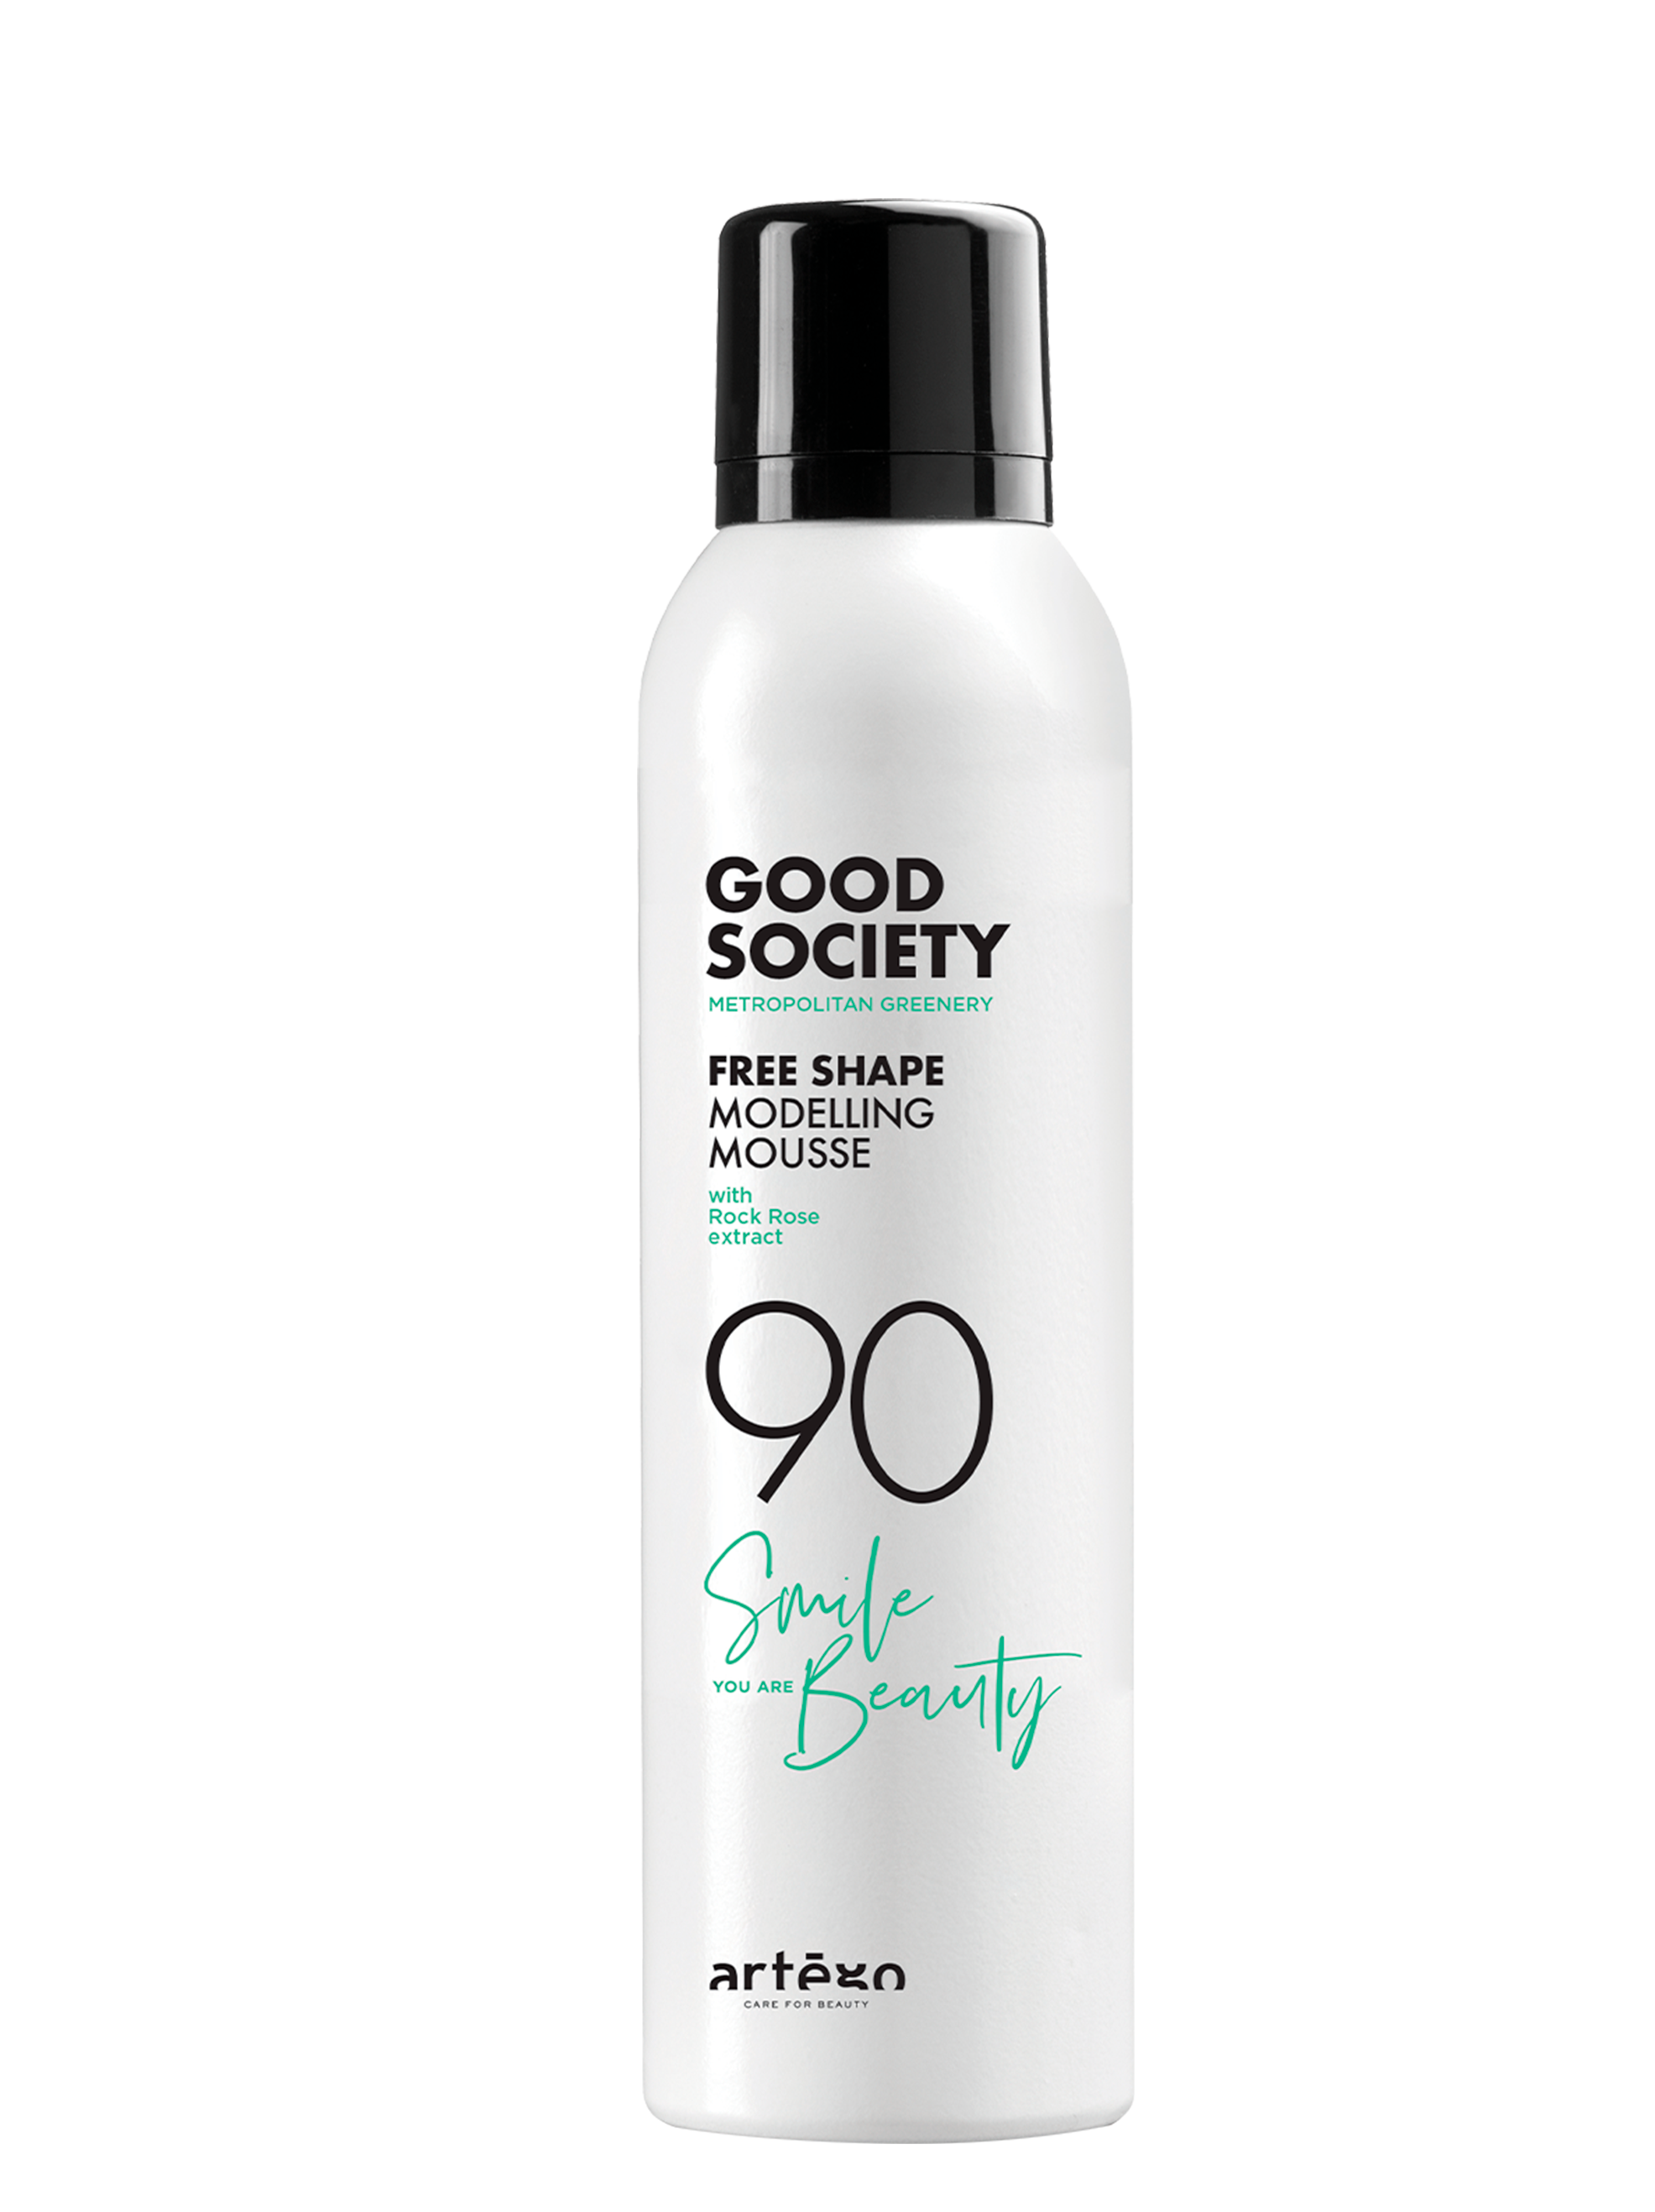 90-Good-Society-Modelling-Mousse